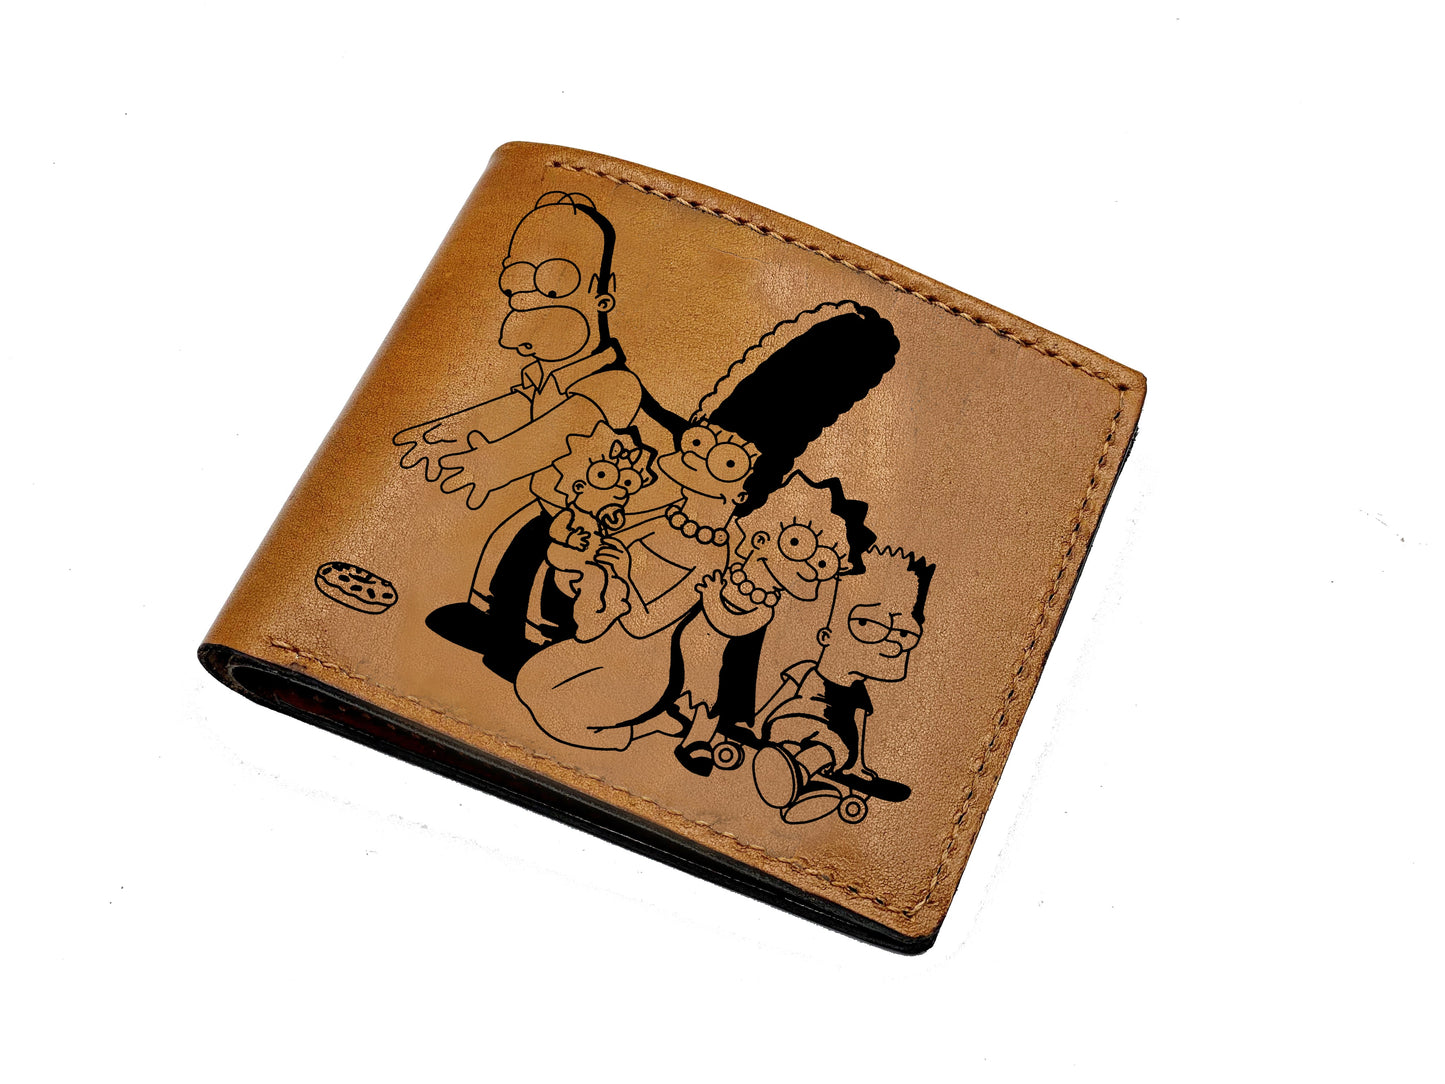 Mayan Corner - Personalized genuine leather wallet, bifold leather gift for dad from daughter, The Simpsons movie art wallet, birthday gift for men